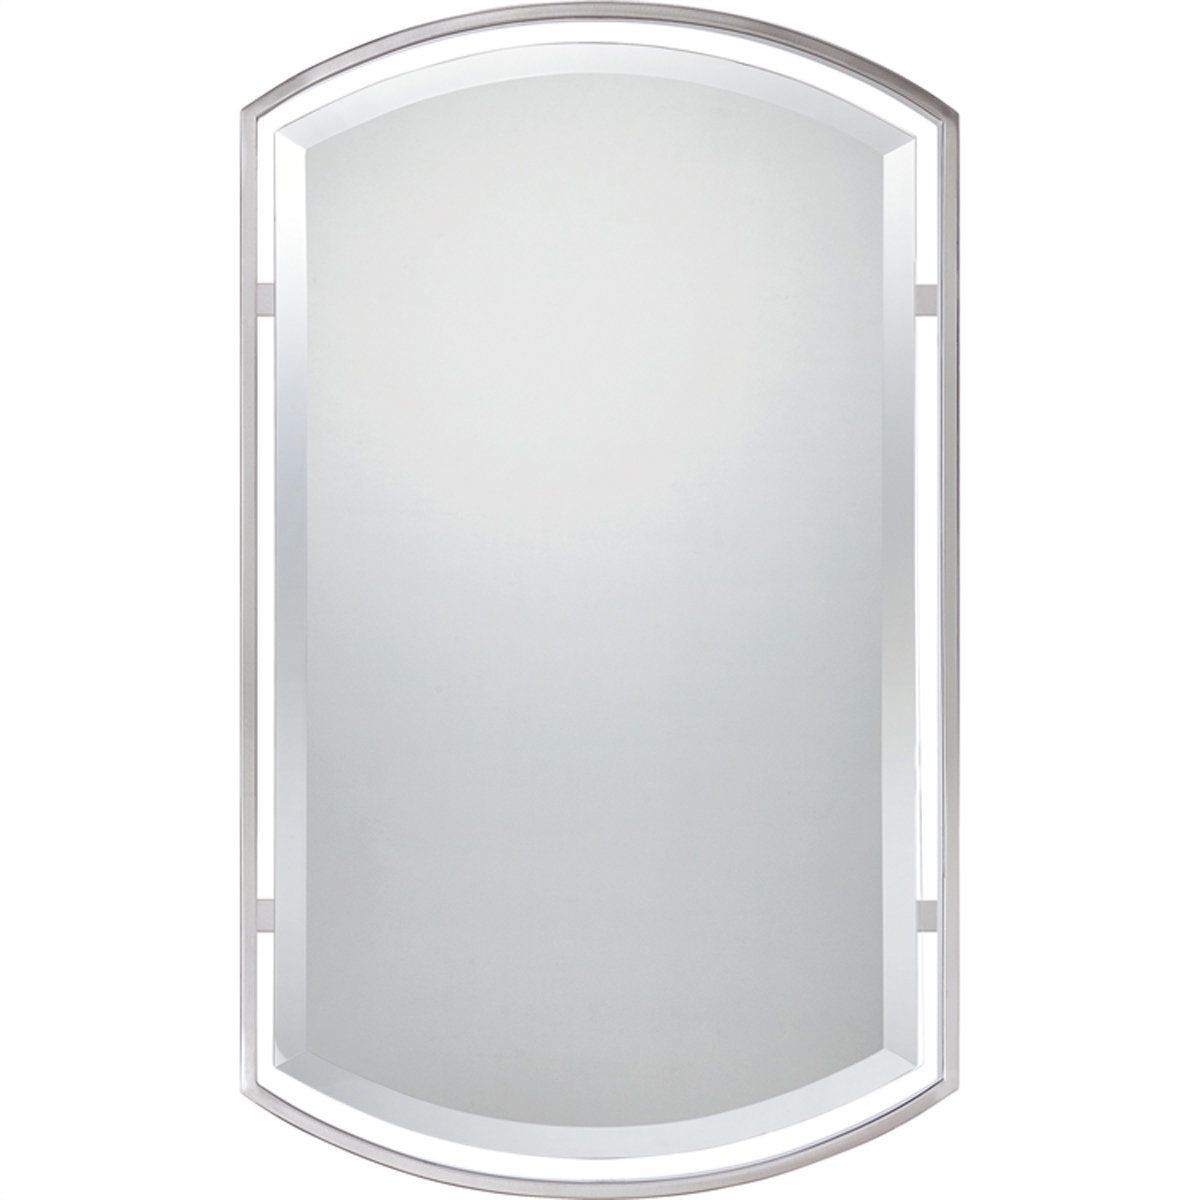 Floating Frame Rounded Rectangular Mirror In 2021 | Brushed Nickel Throughout Brushed Nickel Rectangular Wall Mirrors (View 11 of 15)